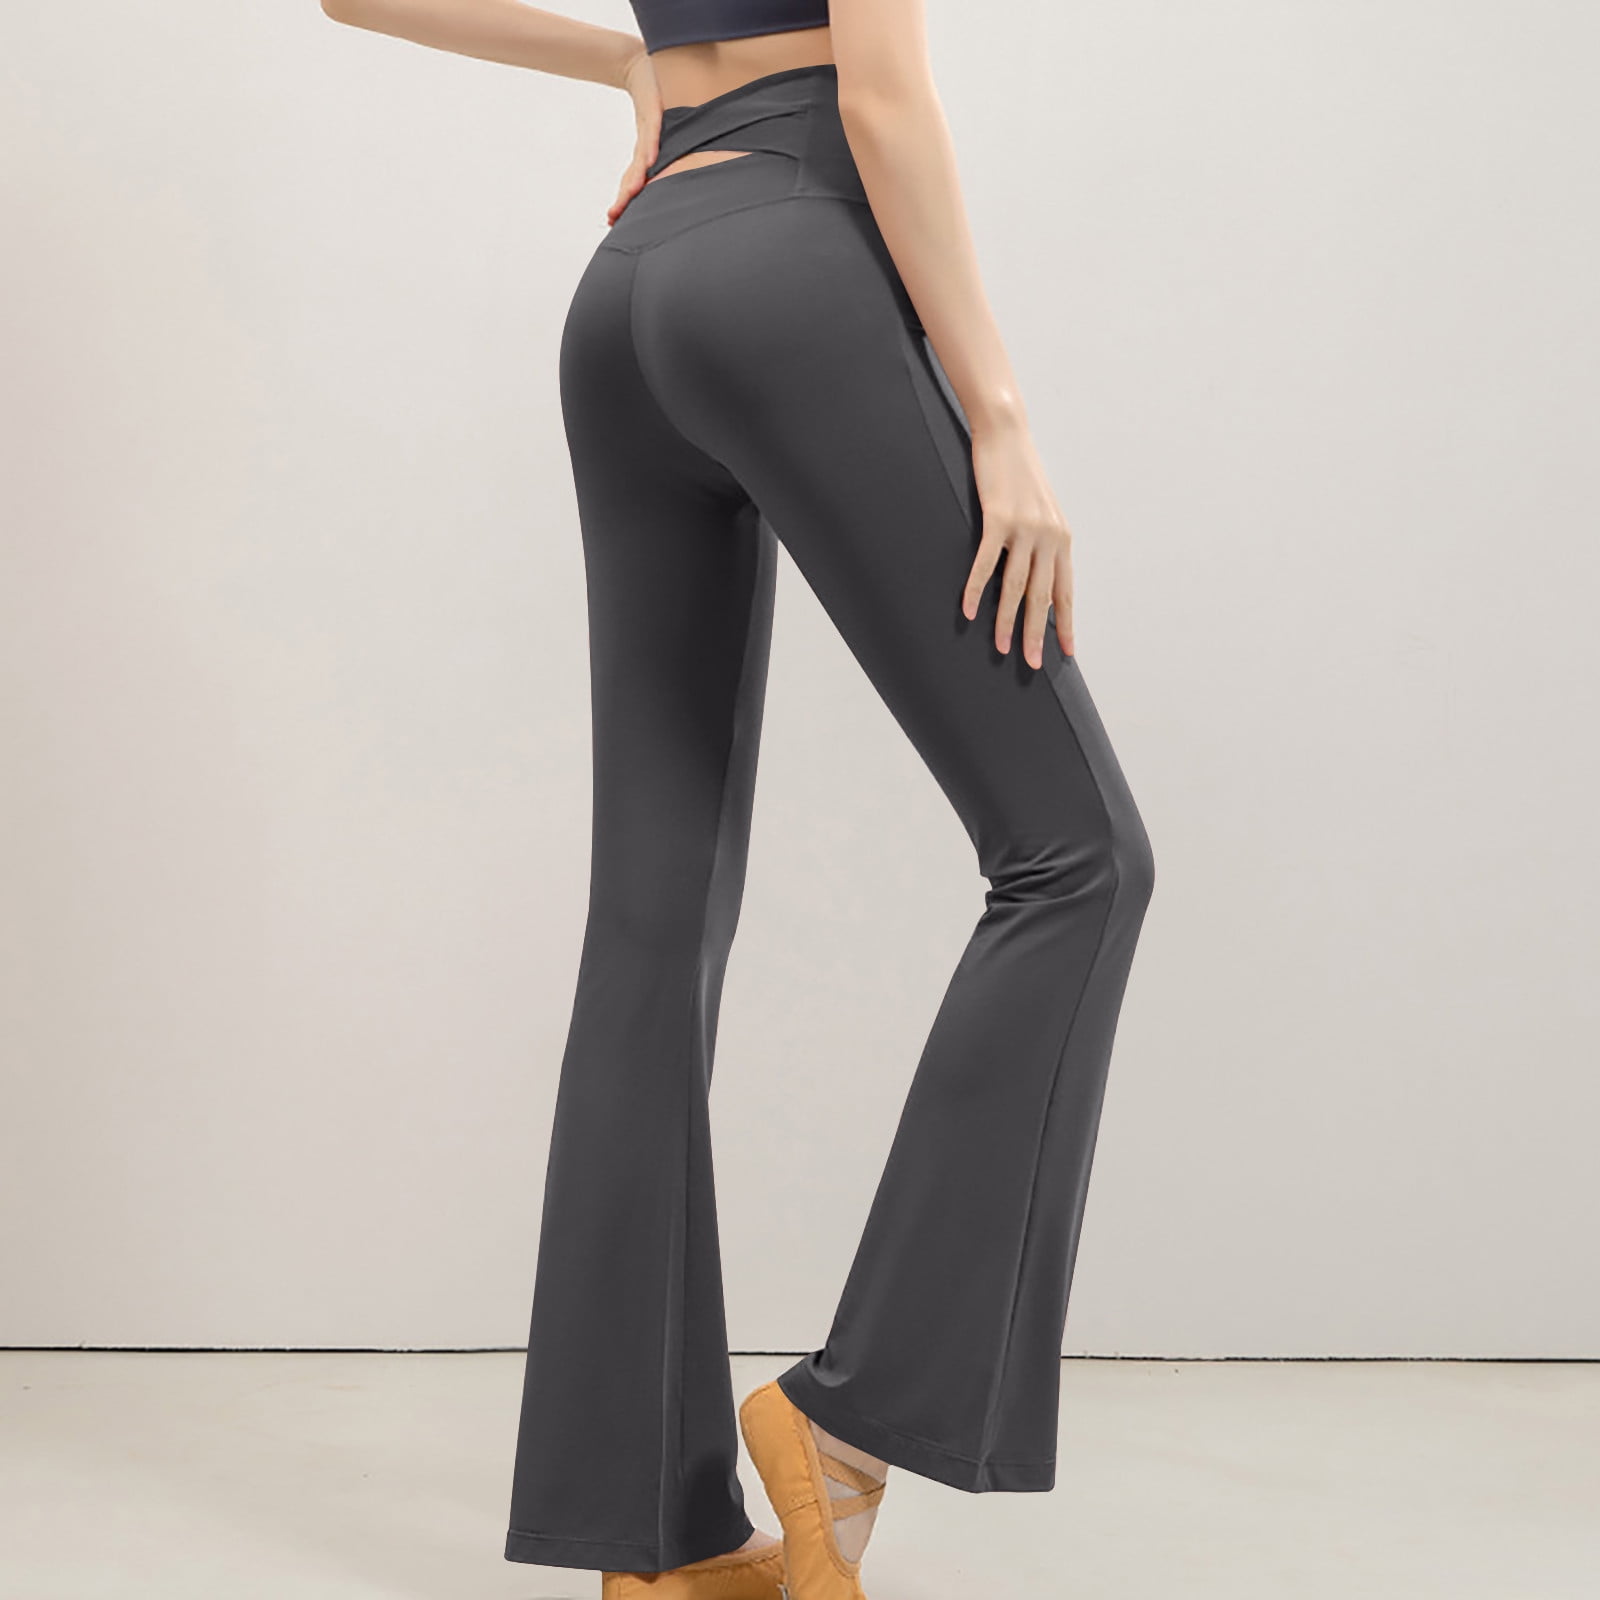 Buy ALONG FIT Bootcut Yoga Pants for Women with Pockets Bootleg Work Pants  High Waisted Tummy Control Womens Flared Workout Pants at Amazon.in